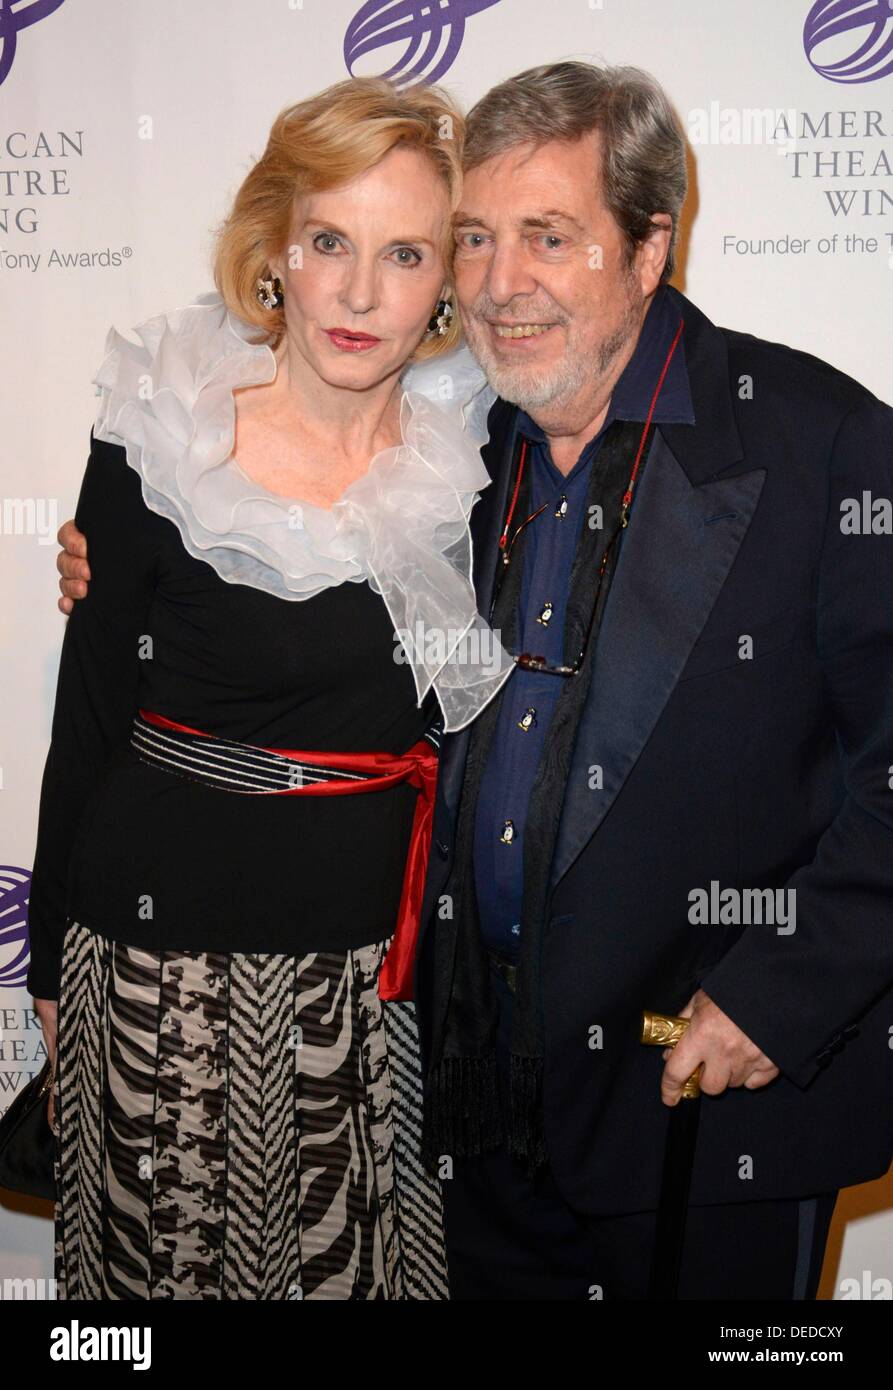 New York, NY. 16th Sep, 2013. Pia Lindstrom, Tony Walters at arrivals for American Theatre Wing Annual Gala 2013, The Plaza Hotel, New York, NY September 16, 2013. © Derek Storm/Everett Collection/Alamy Live News Stock Photo